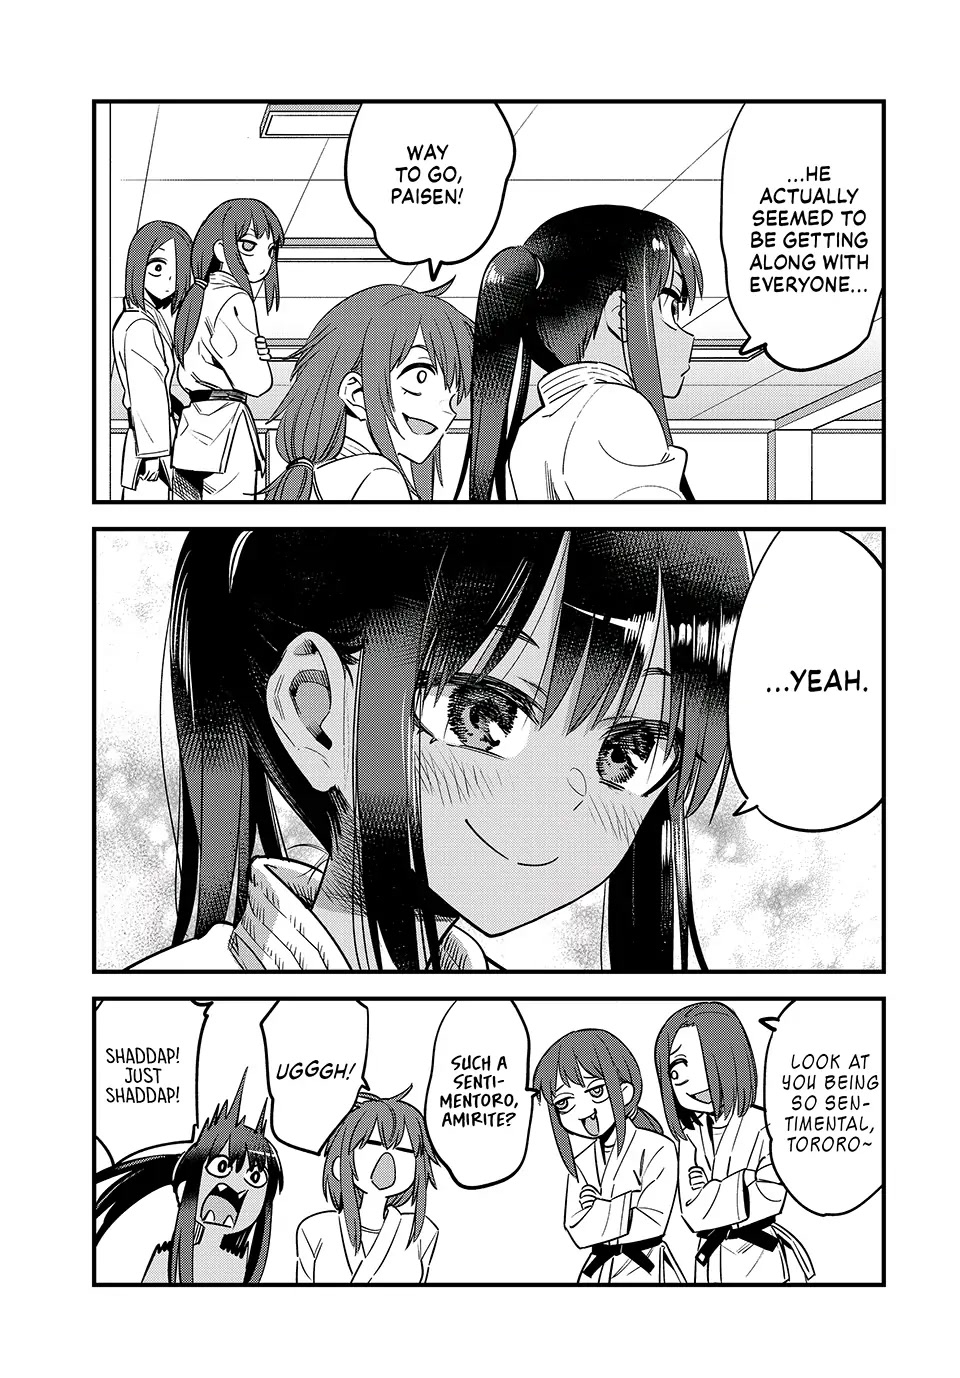 Please don't bully me, Nagatoro chapter 129 page 2